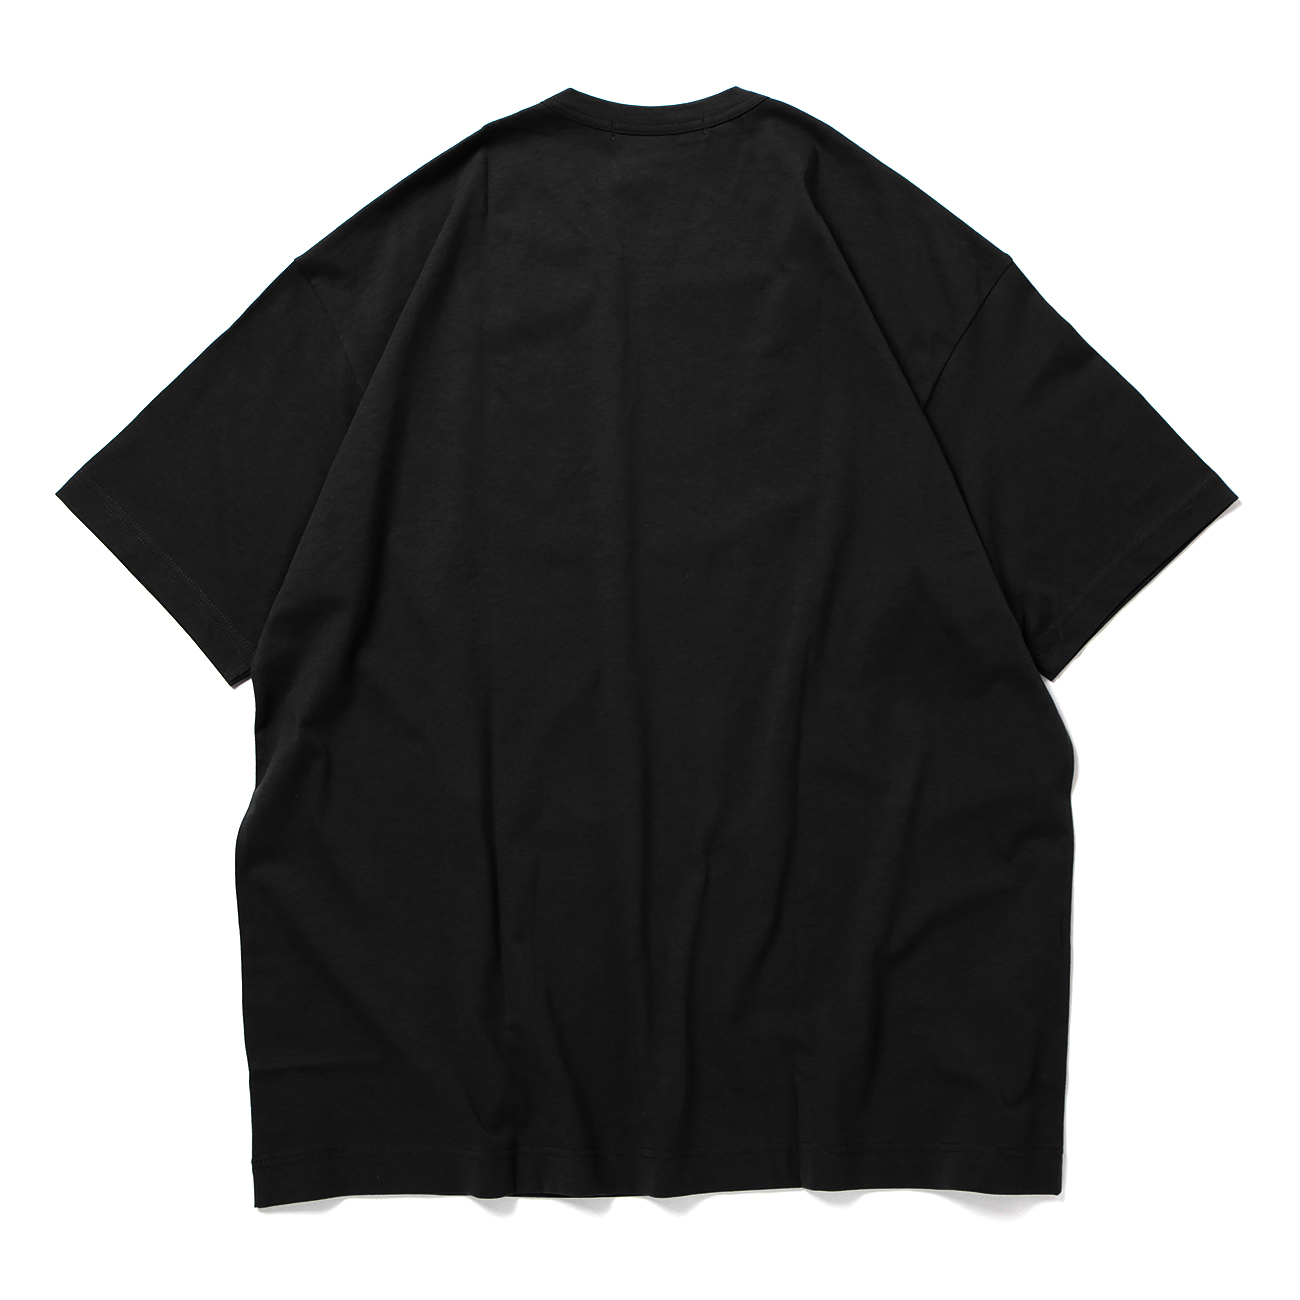 cotton jersey plain with printed CDG SHIRT logo at front - Black